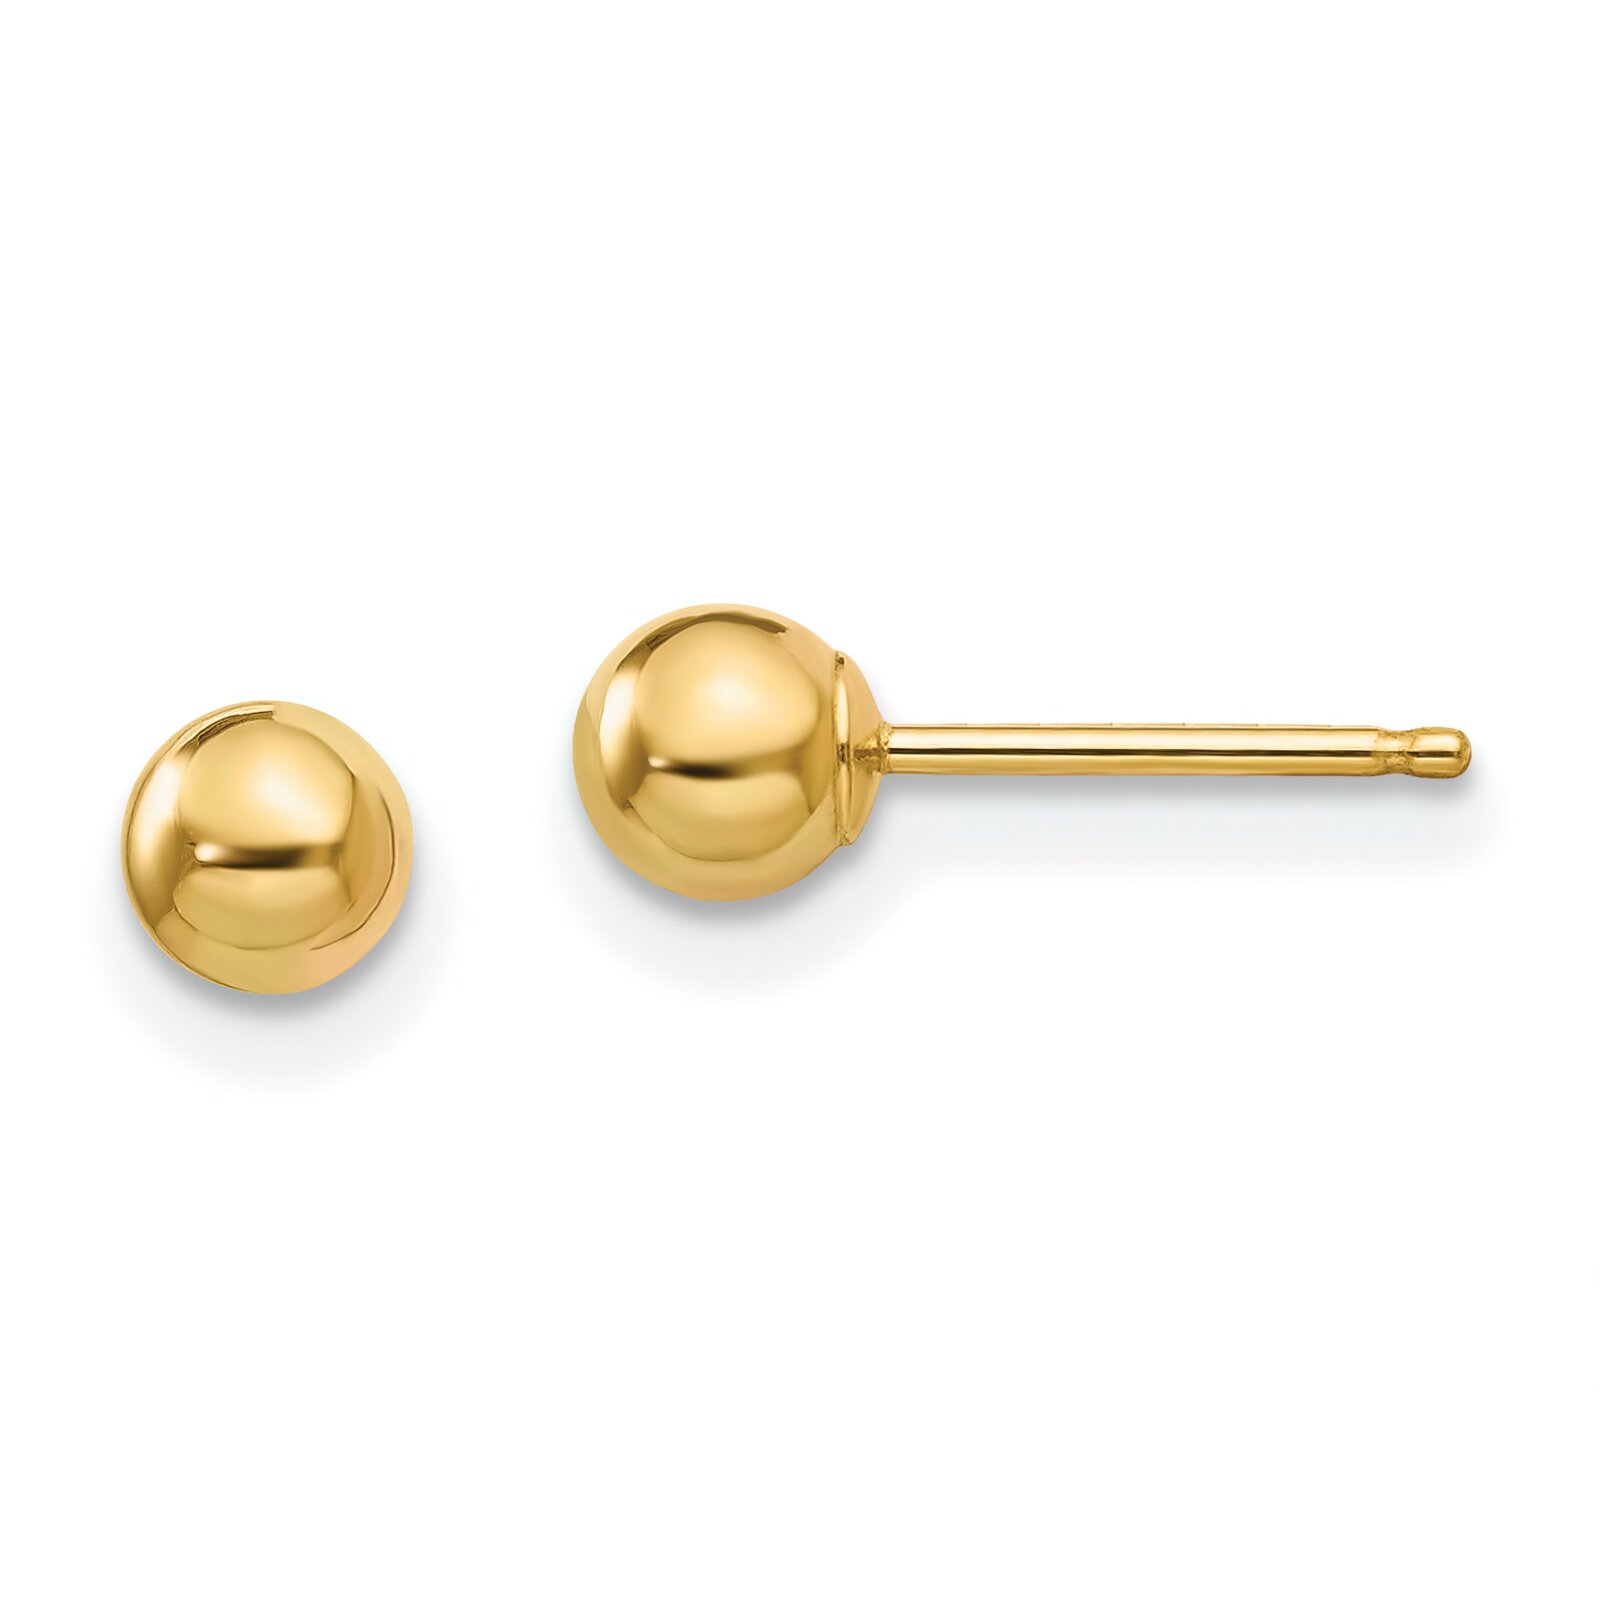 Findingking 14K Yellow Gold Ball Stud Earrings Polished Jewelry